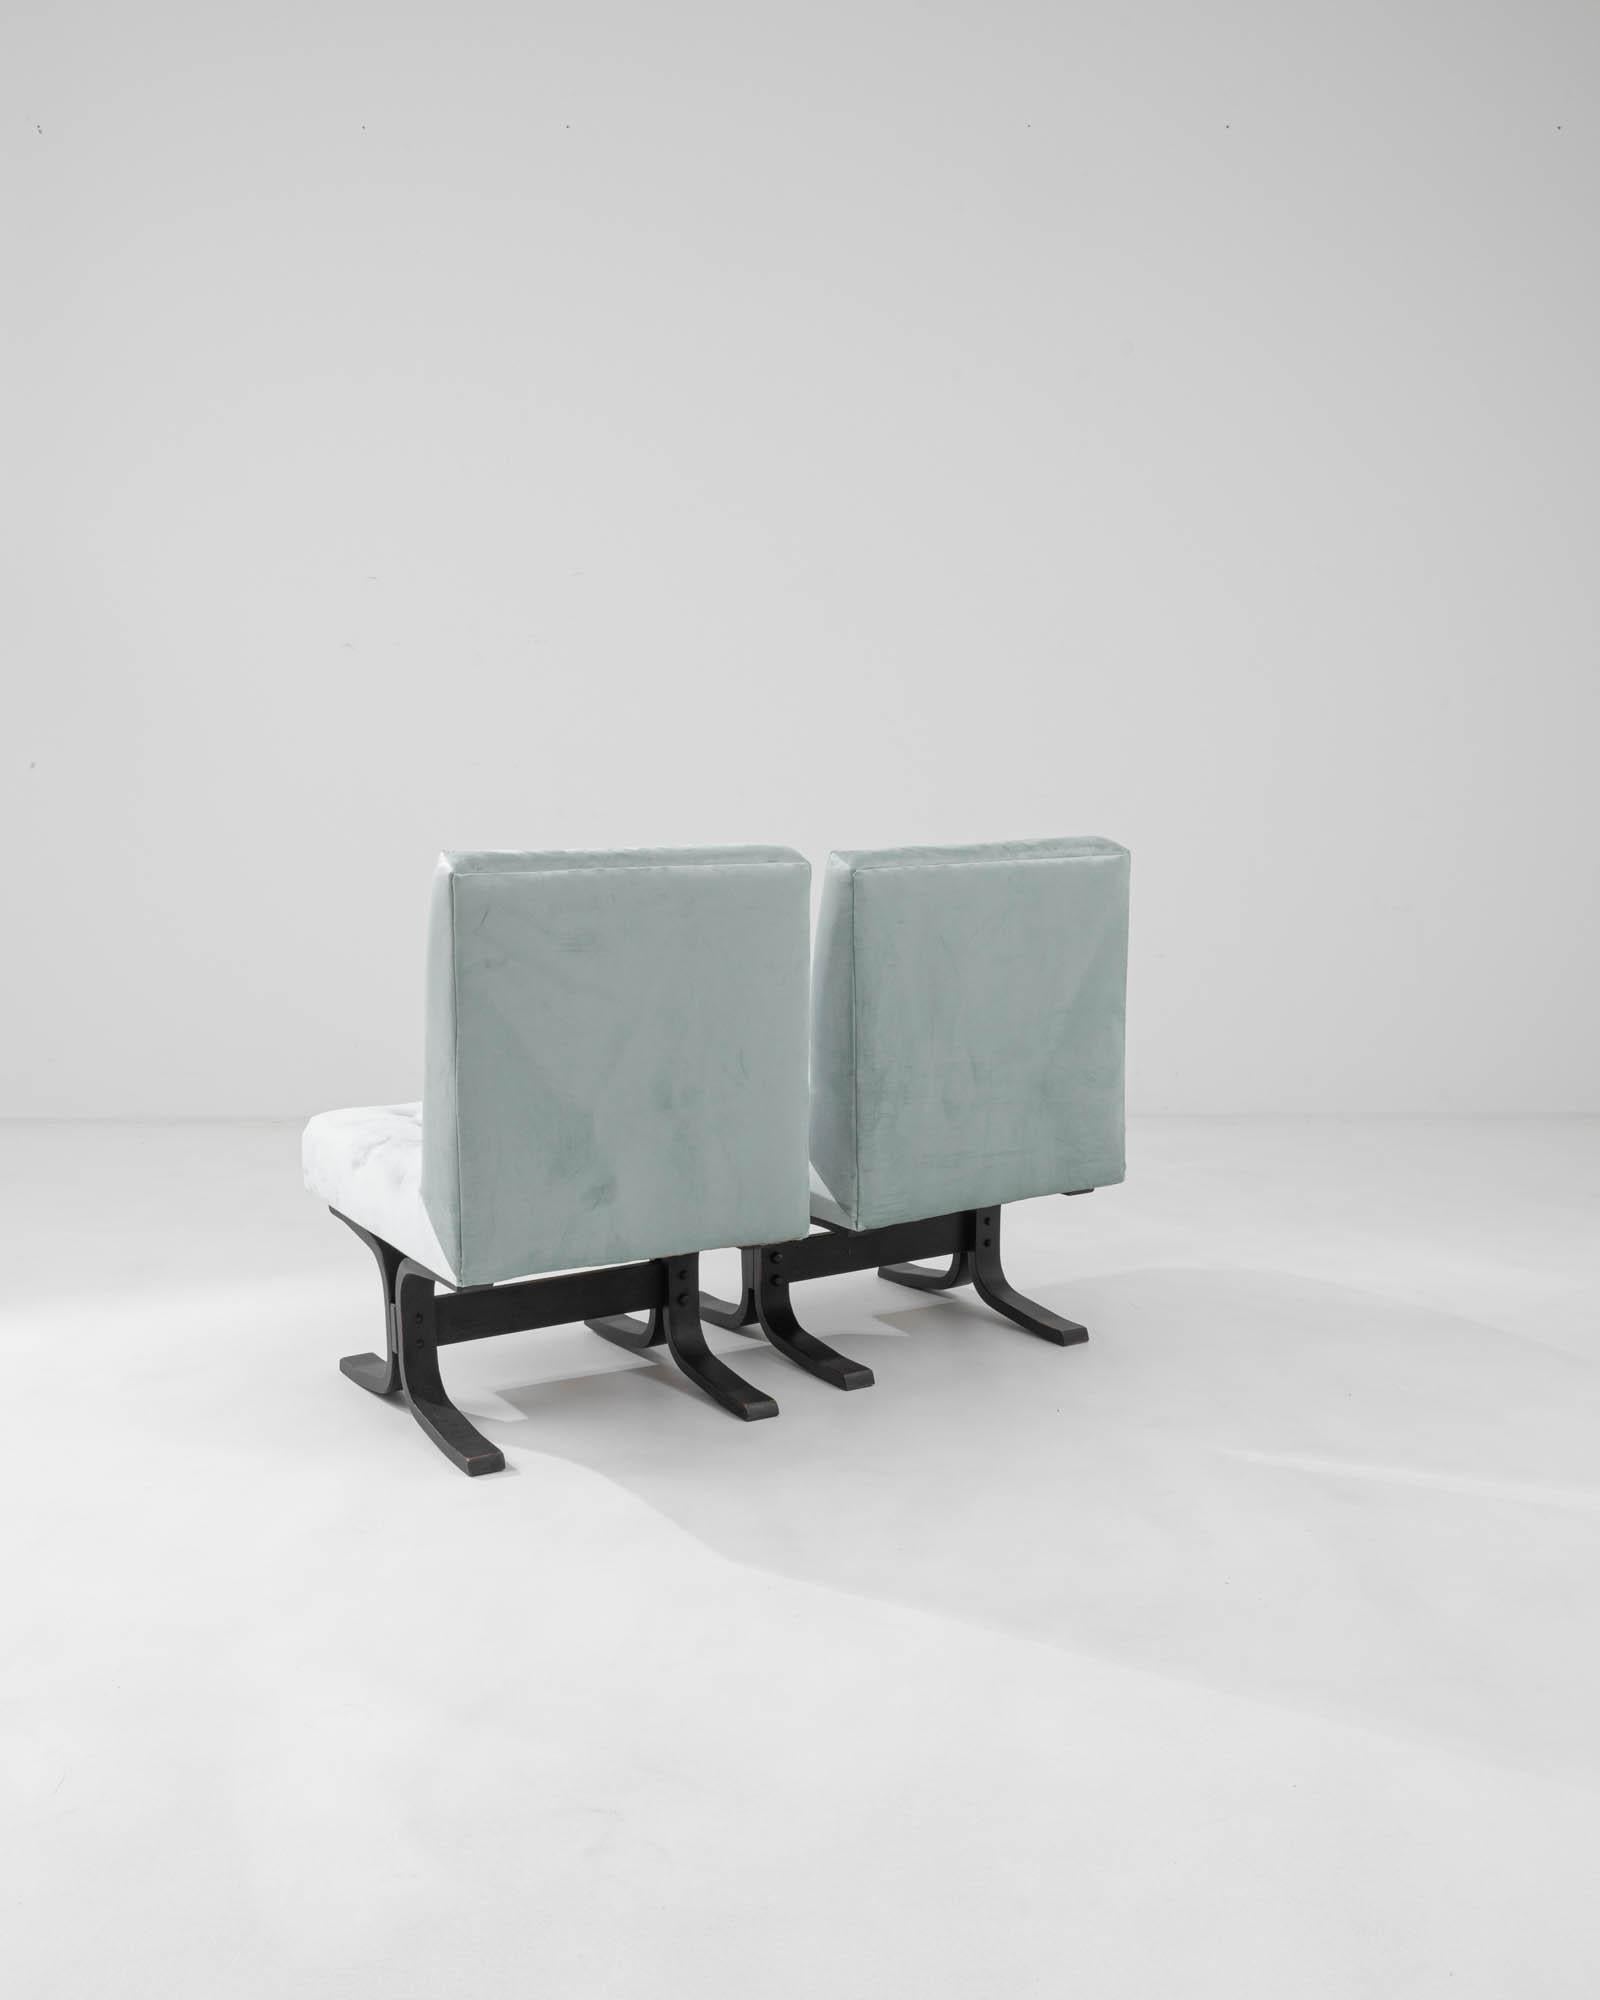 Upholstery 1960s Czechia Upholstered Chairs by Ludvik Volak, Set of 2 For Sale